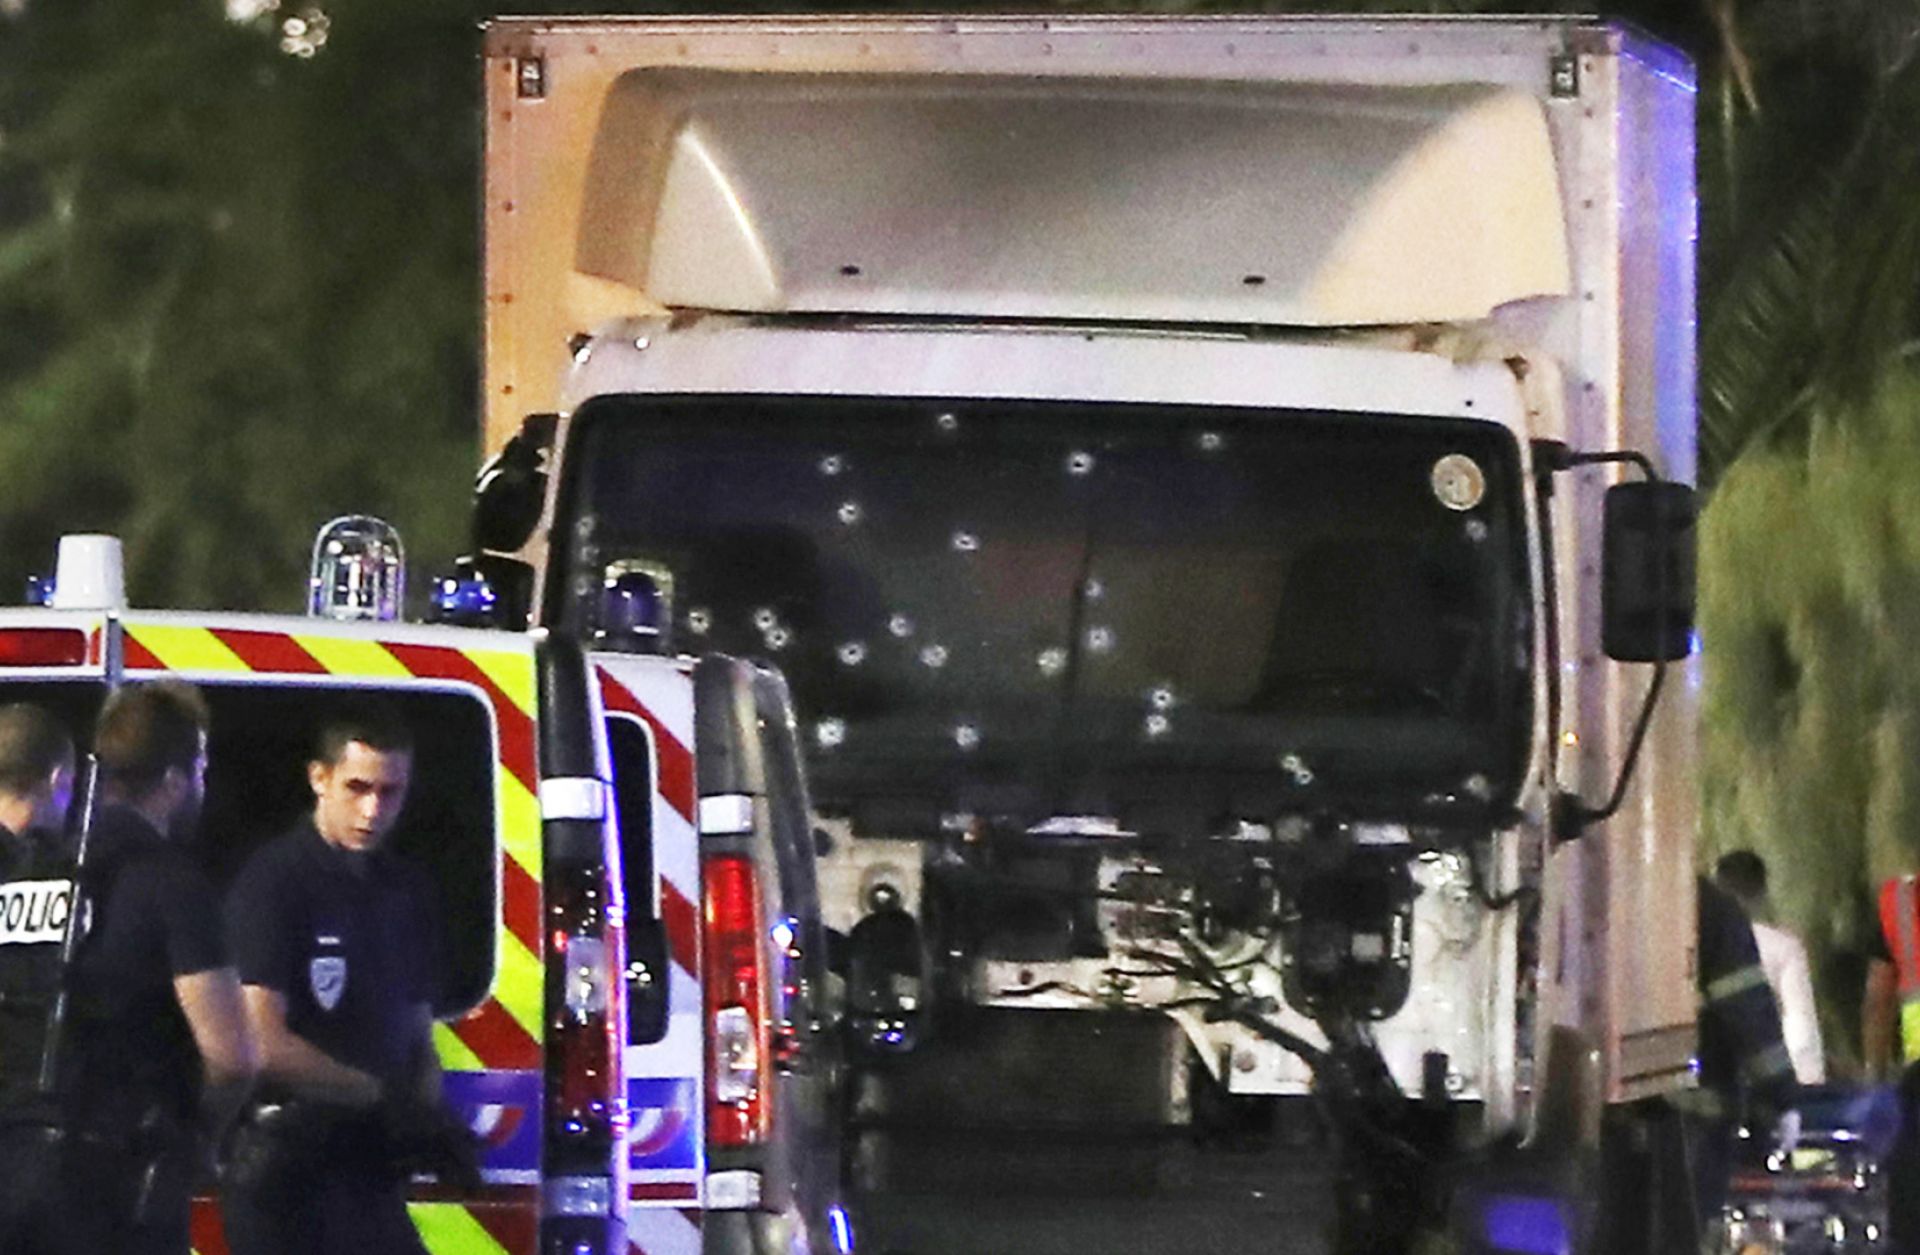 Police officers stand near the truck used to plow through a crowd in Nice, France, on July 14. Based on the rampage's success, the Islamic State's Rumiyah magazine has encouraged the group's followers to conduct more attacks using large, paneled trucks.